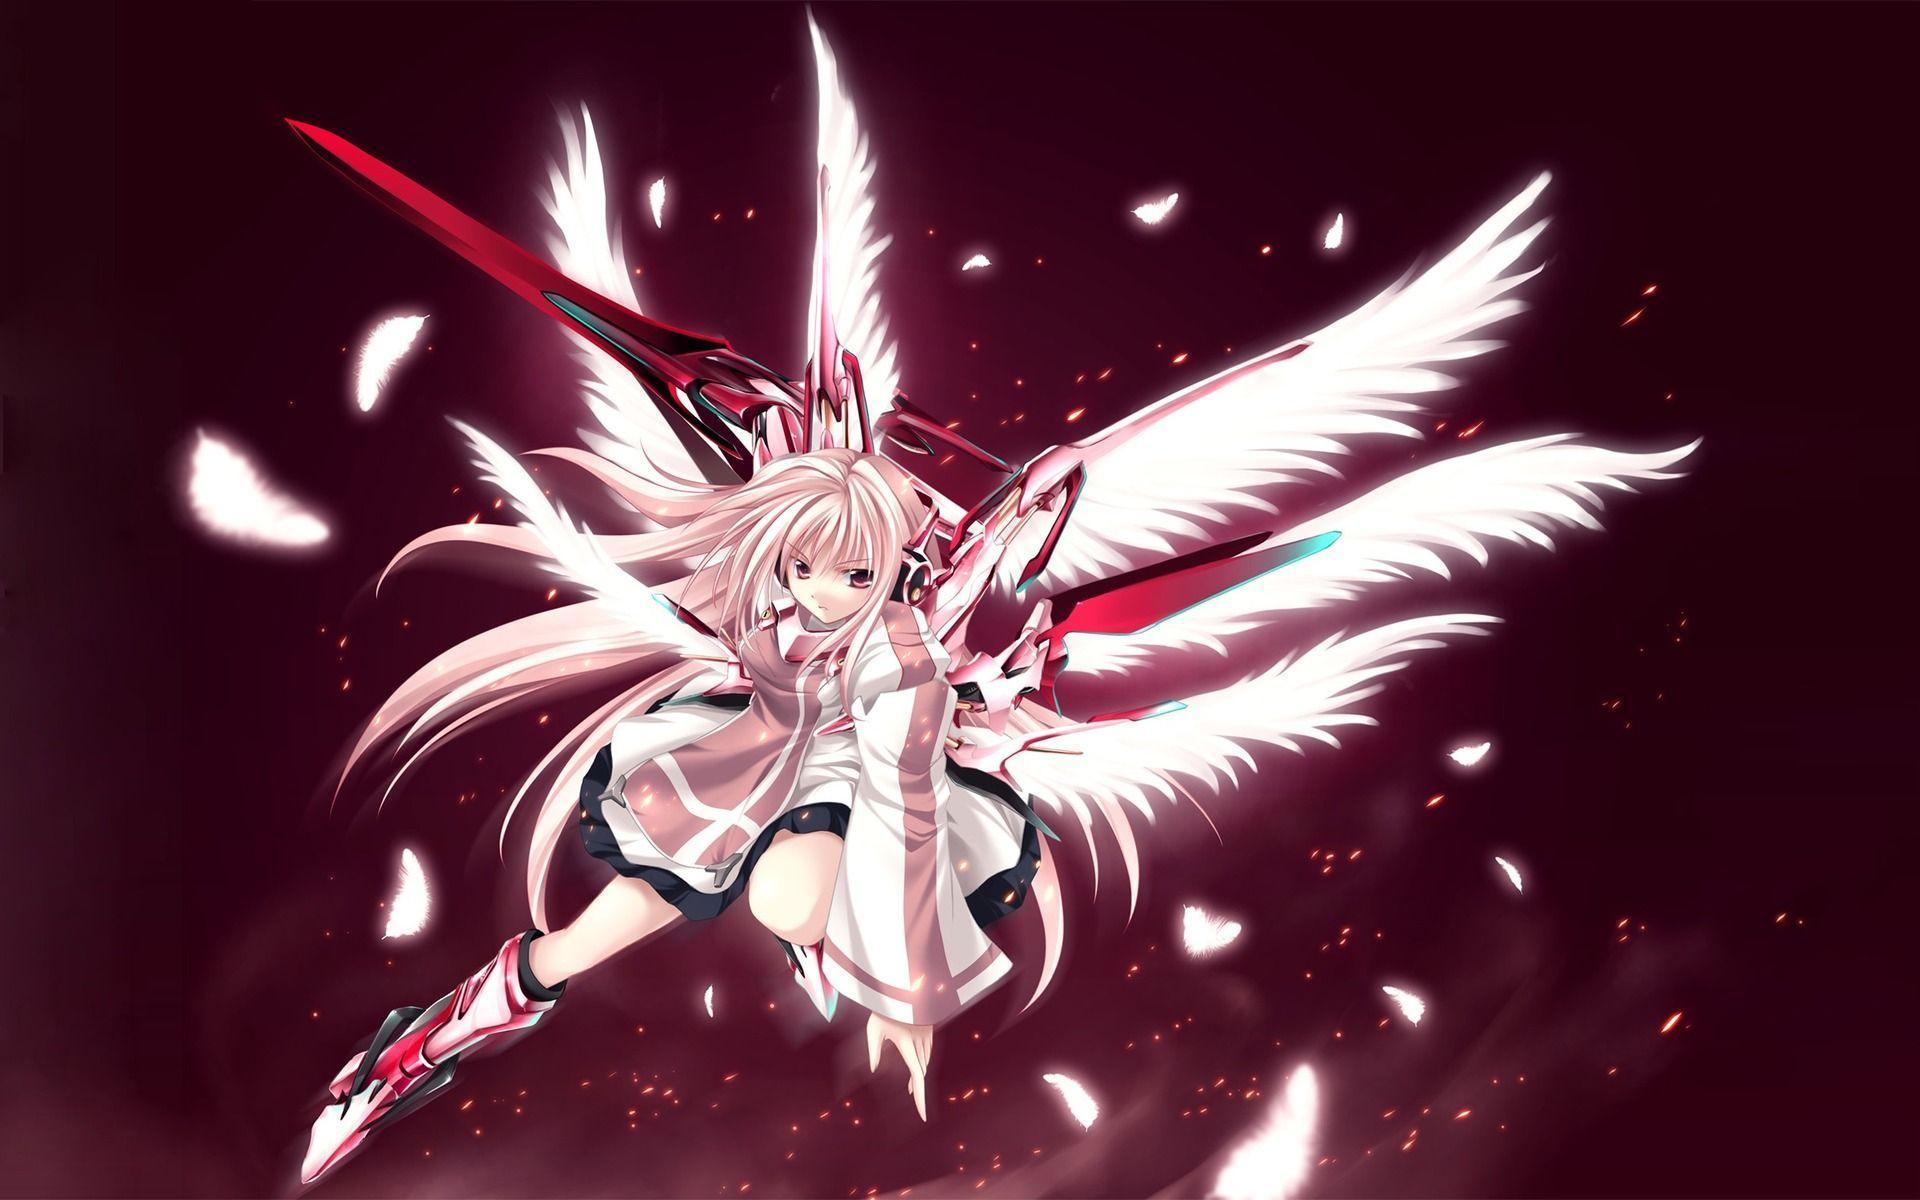 Free Download anime angel HD Wallpaper in 1920x1200 resolutions